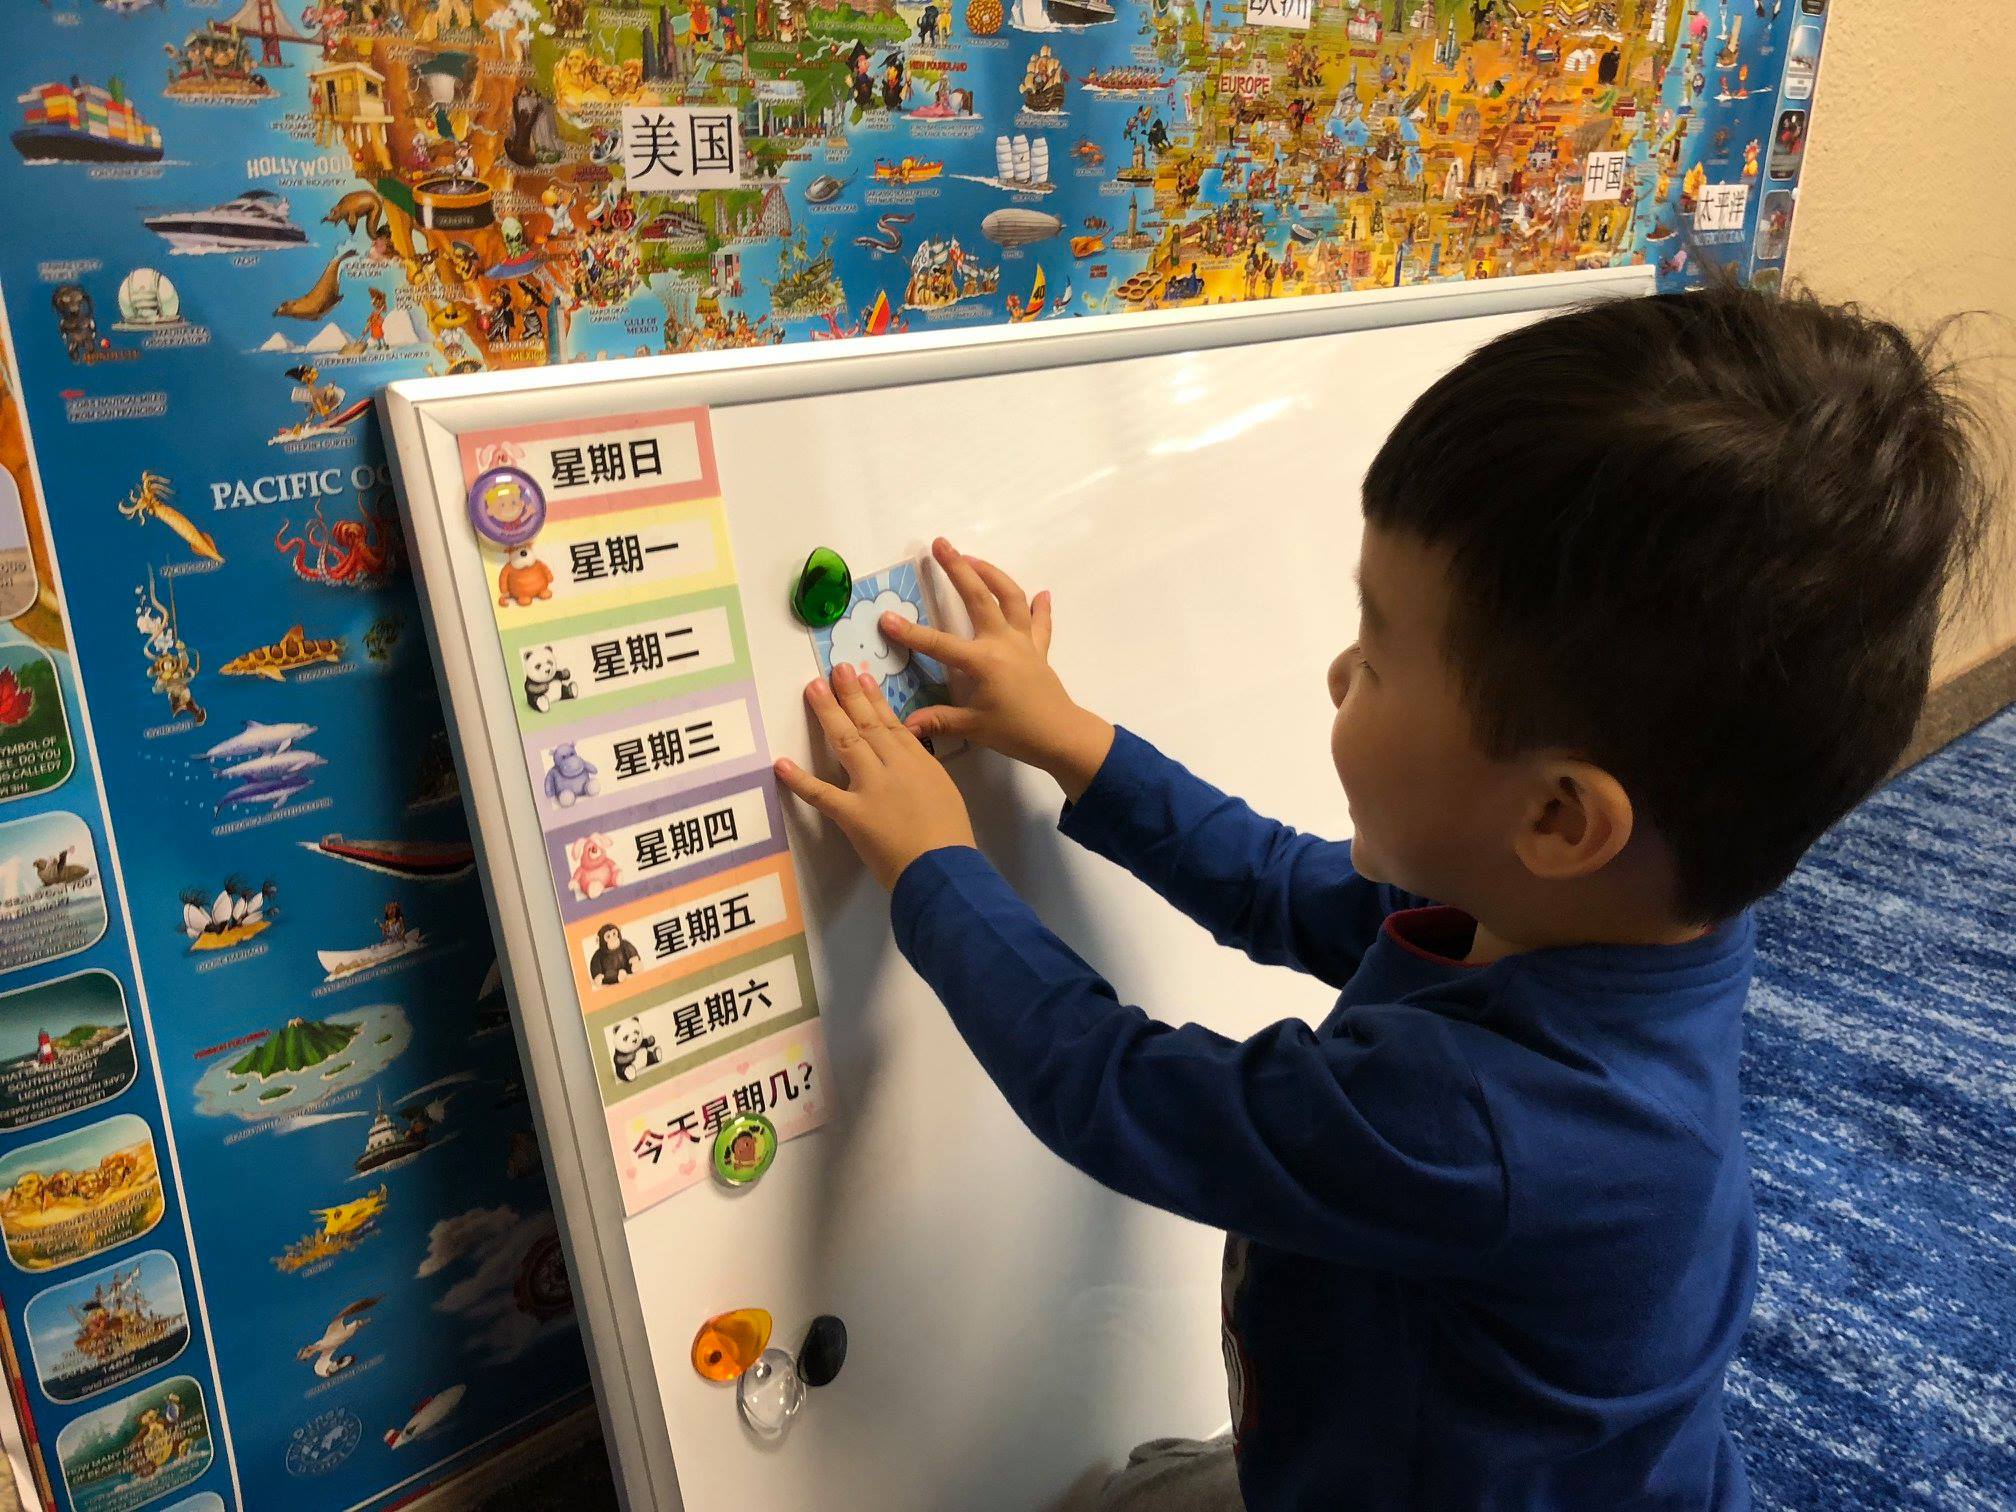 Child putting a picture on a whiteboard.